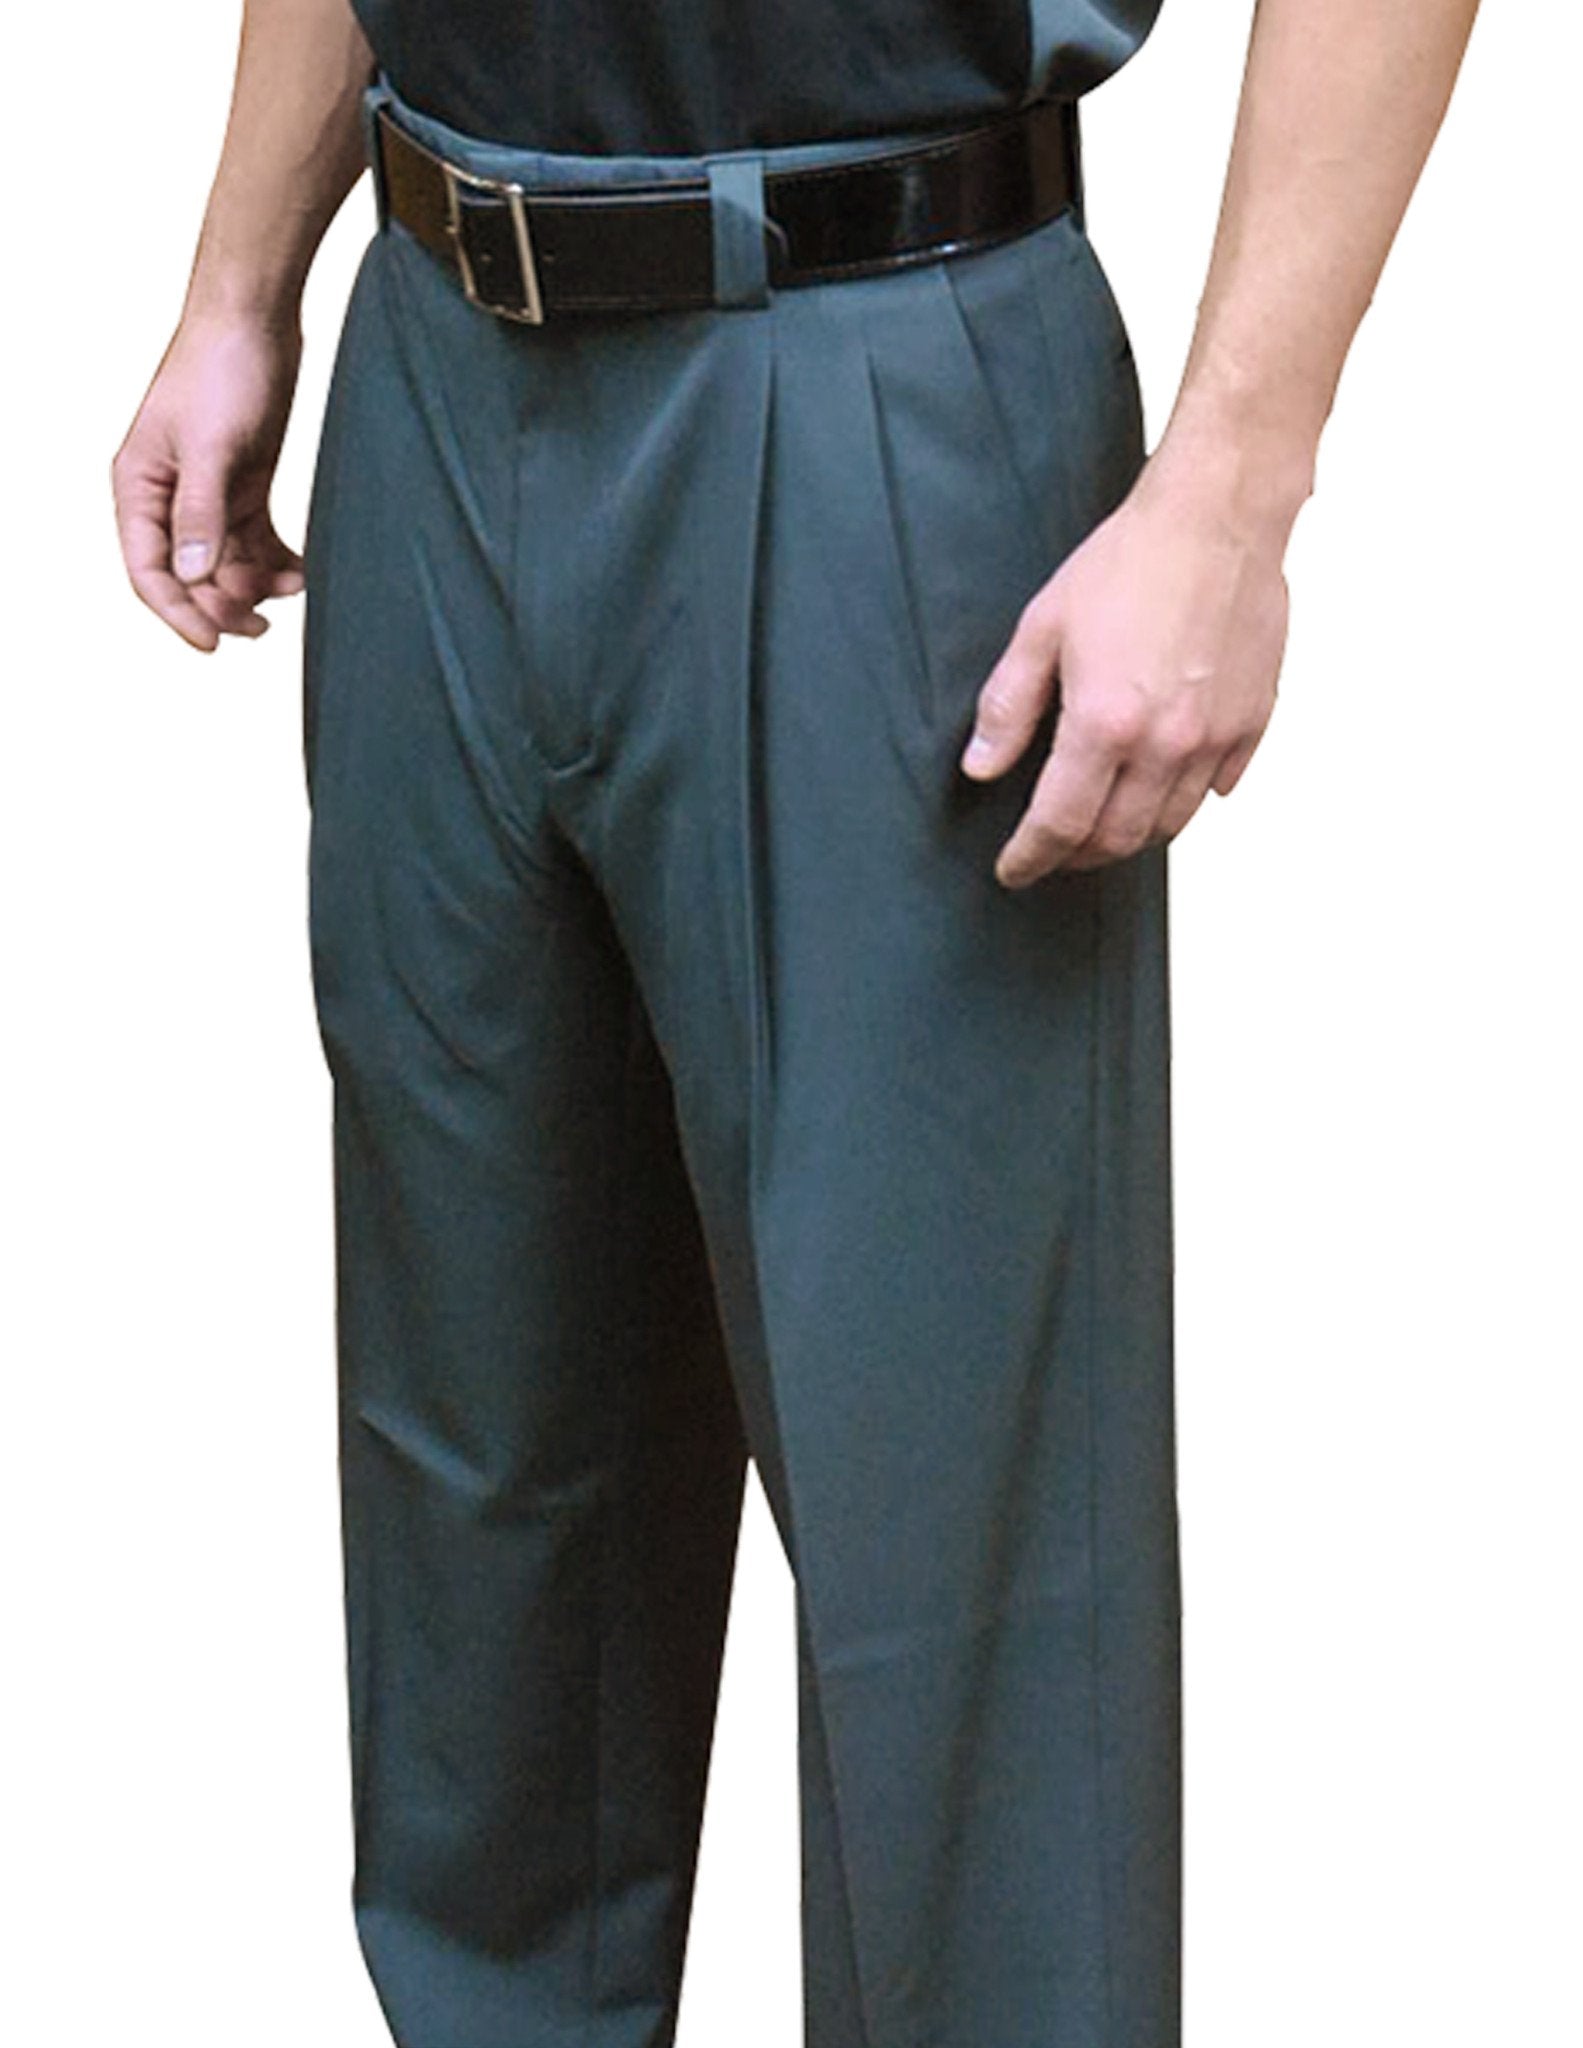 BBS395-Smitty - "NEW EXPANDER WAISTBAND - 4-Way Stretch" Pleated Combo Pants-Charcoal Grey